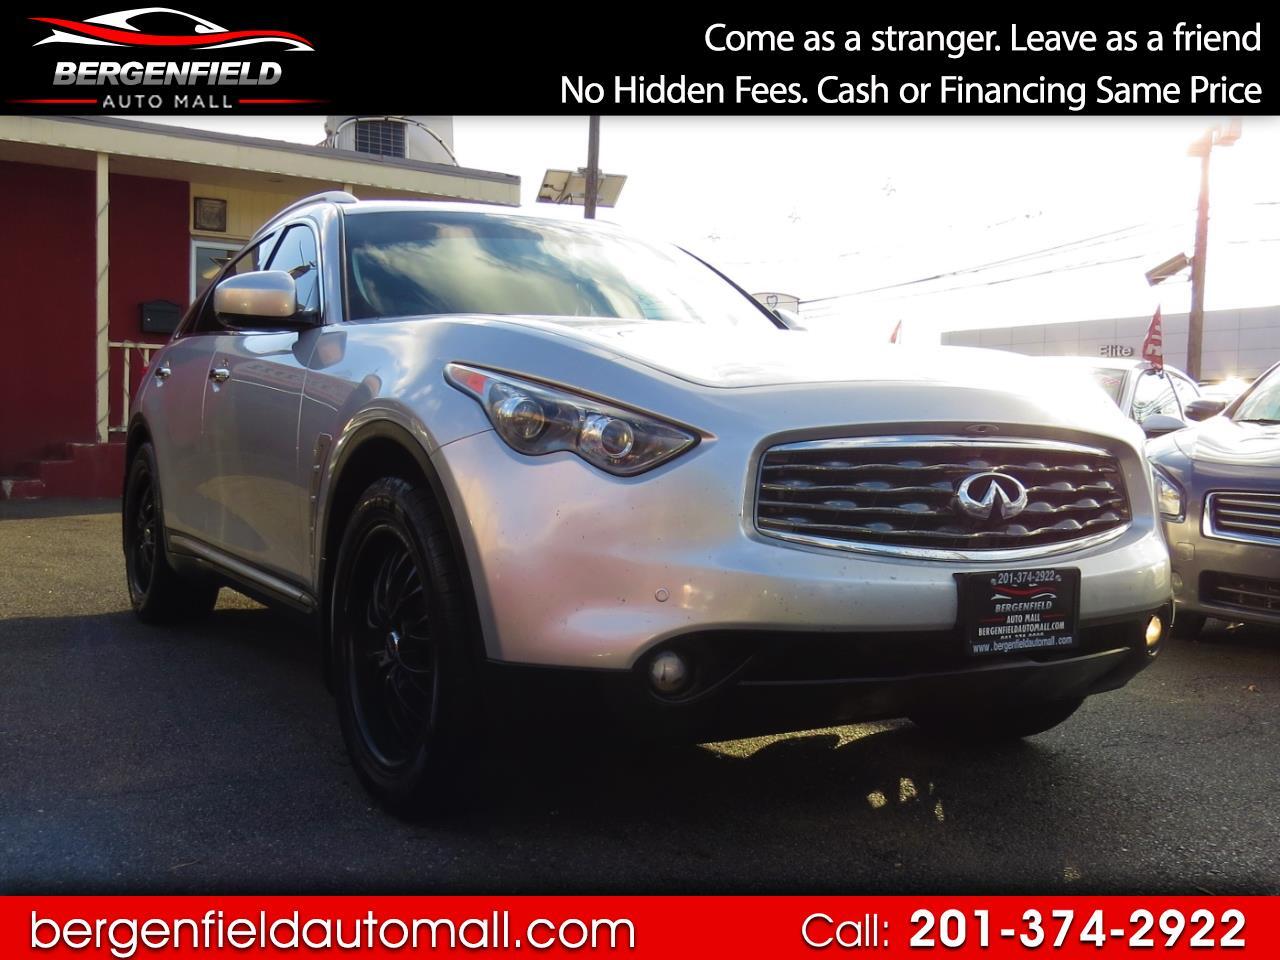 Used 2011 Infiniti Fx Fx35 Awd For Sale In Bergenfield Nj